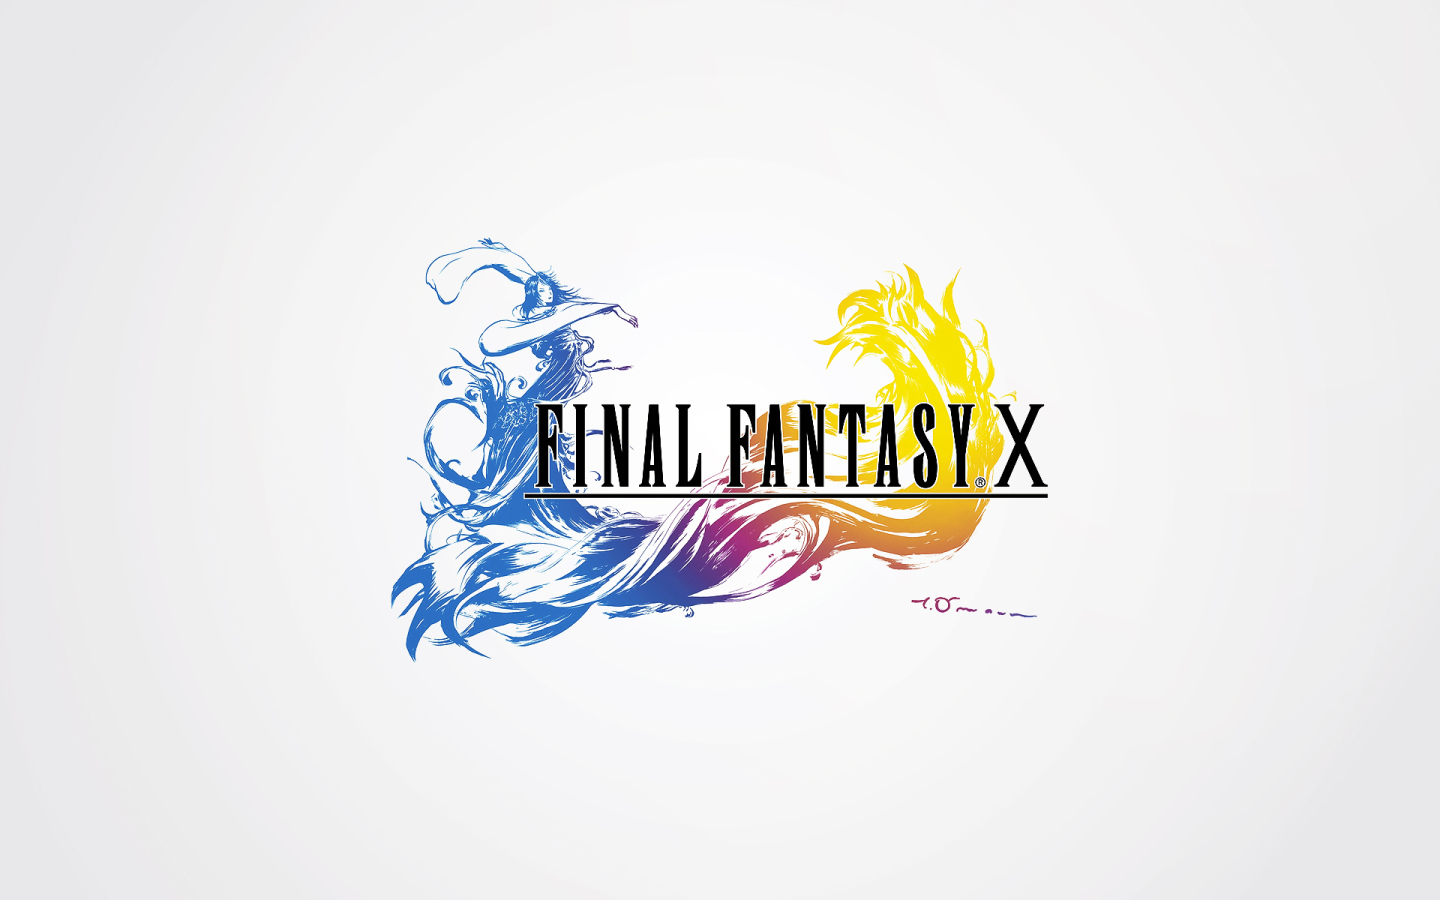 The game's logo on a white background Final Fantasy xv